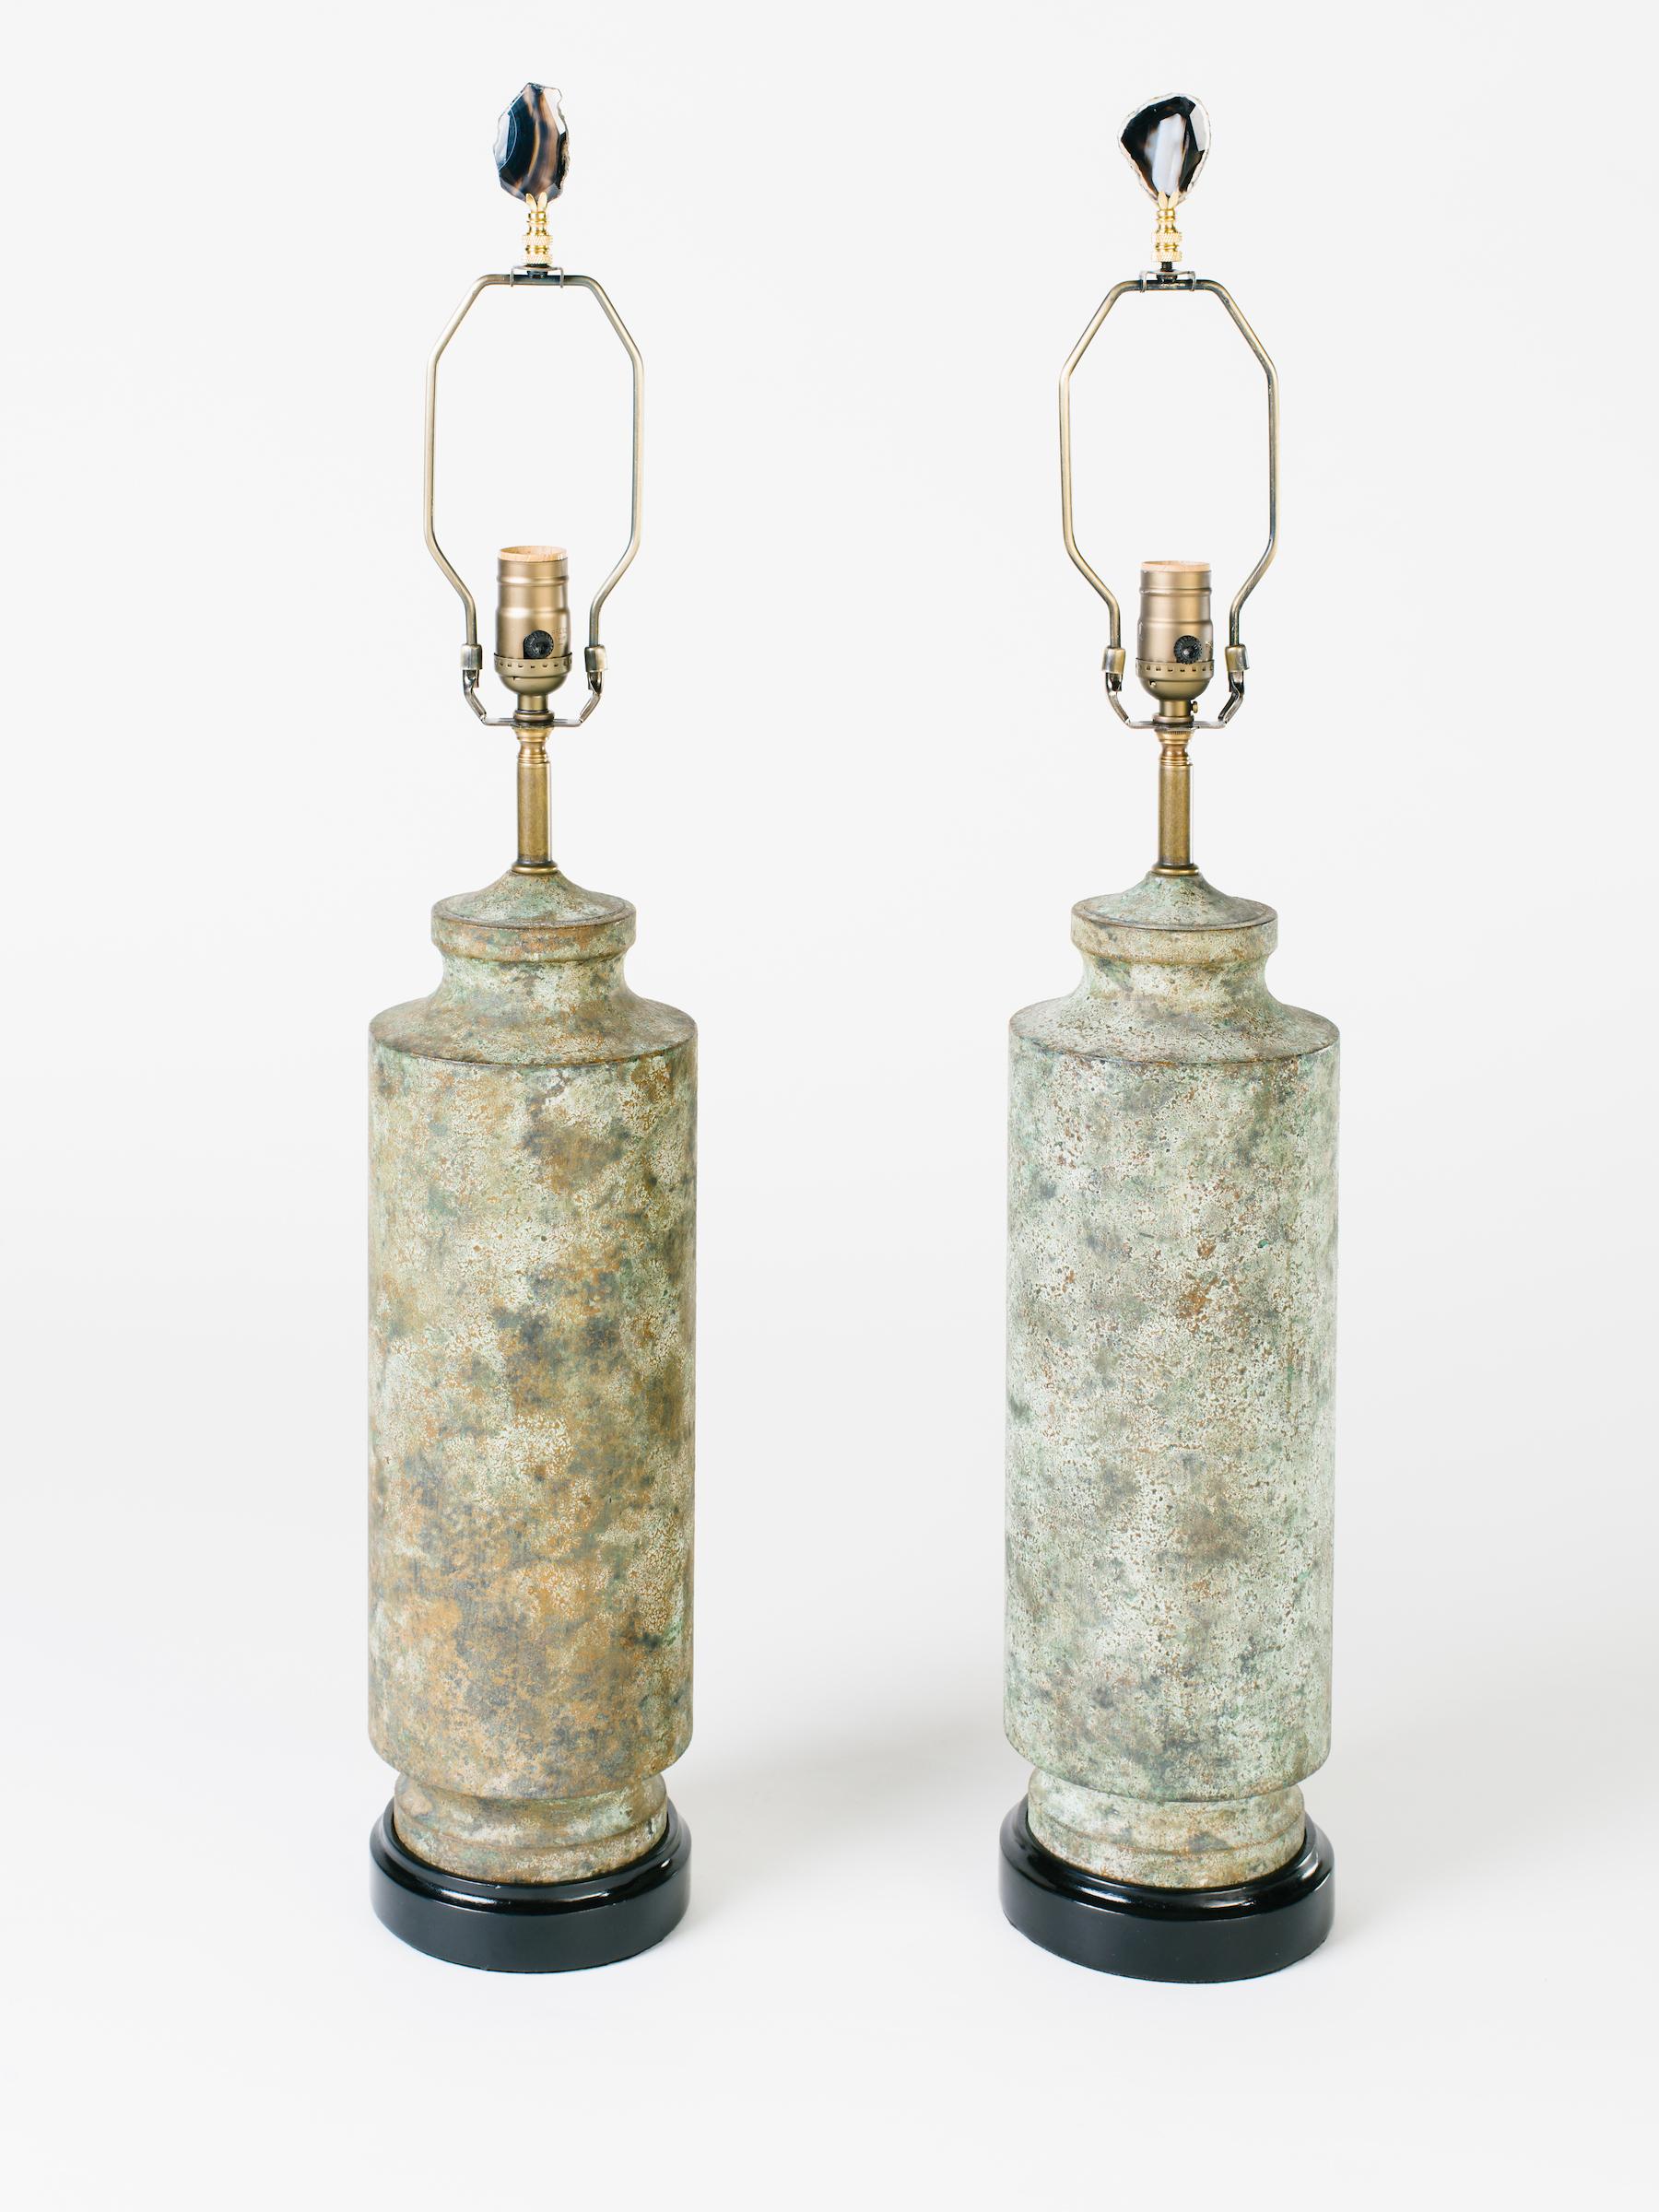 Pair of striking Mid-Century Modern lamps with Brutalist design. Lamps are made of cast iron and have Asian pagoda column forms. Metal has been purposely oxidized for a distressed look reminiscent of camouflage pattern in hues of moss green and